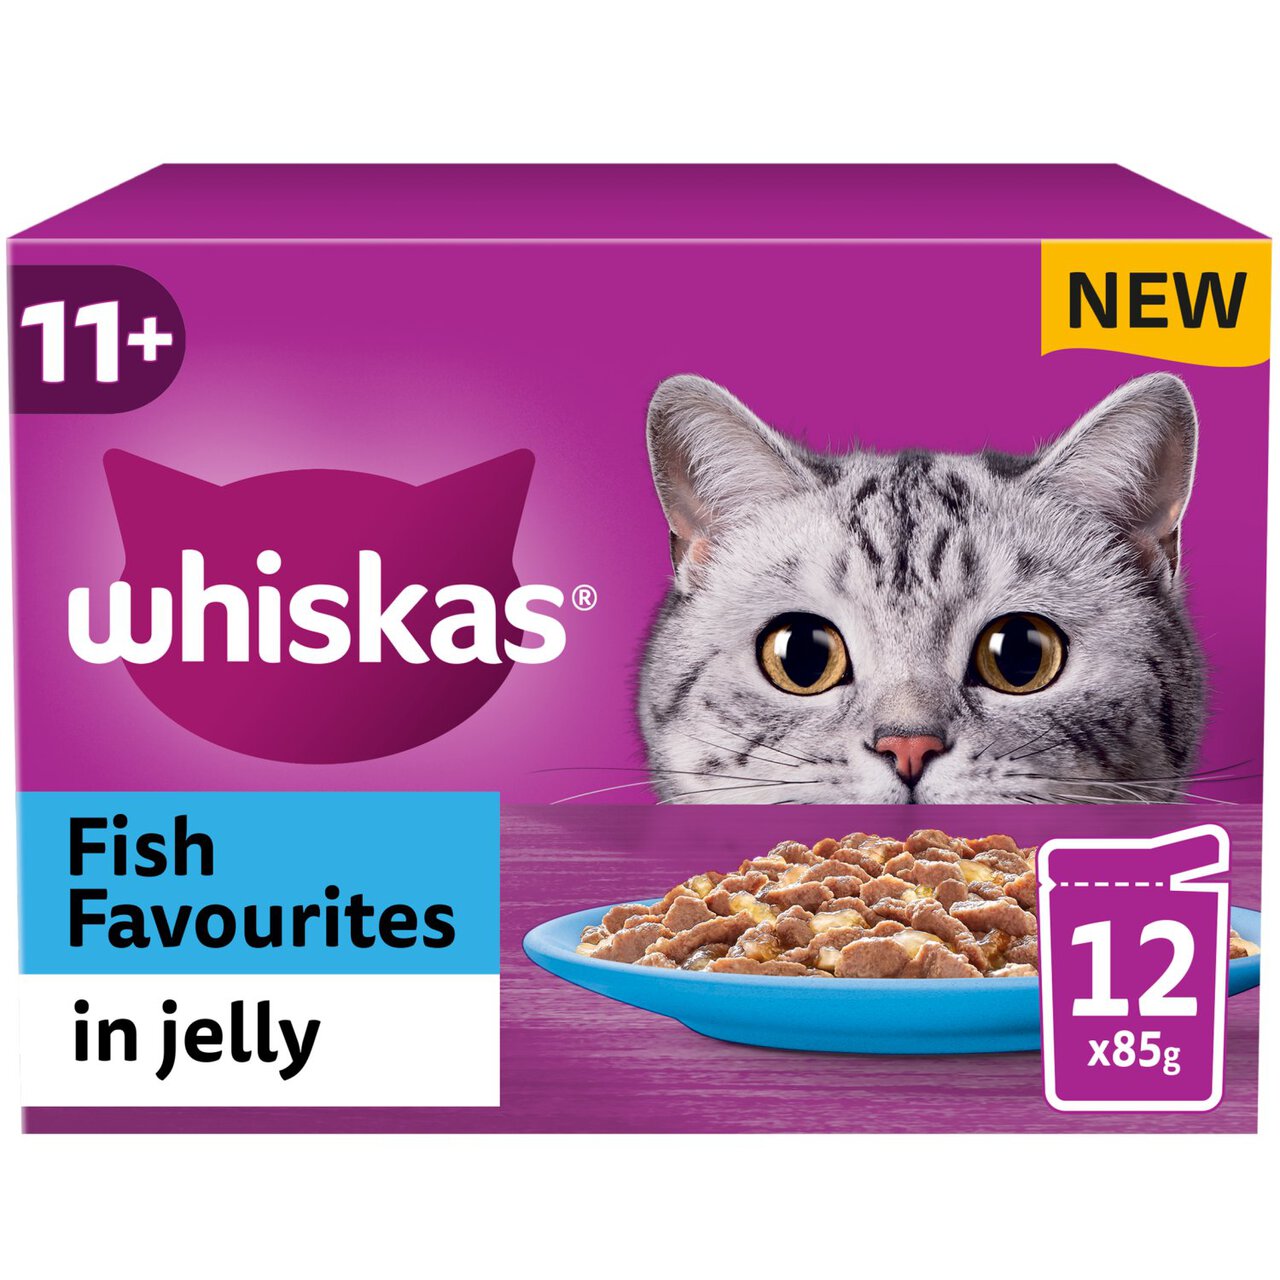 Whiskas 11+ Senior Wet Cat Food Fish Favourites in Jelly 12 x 85g